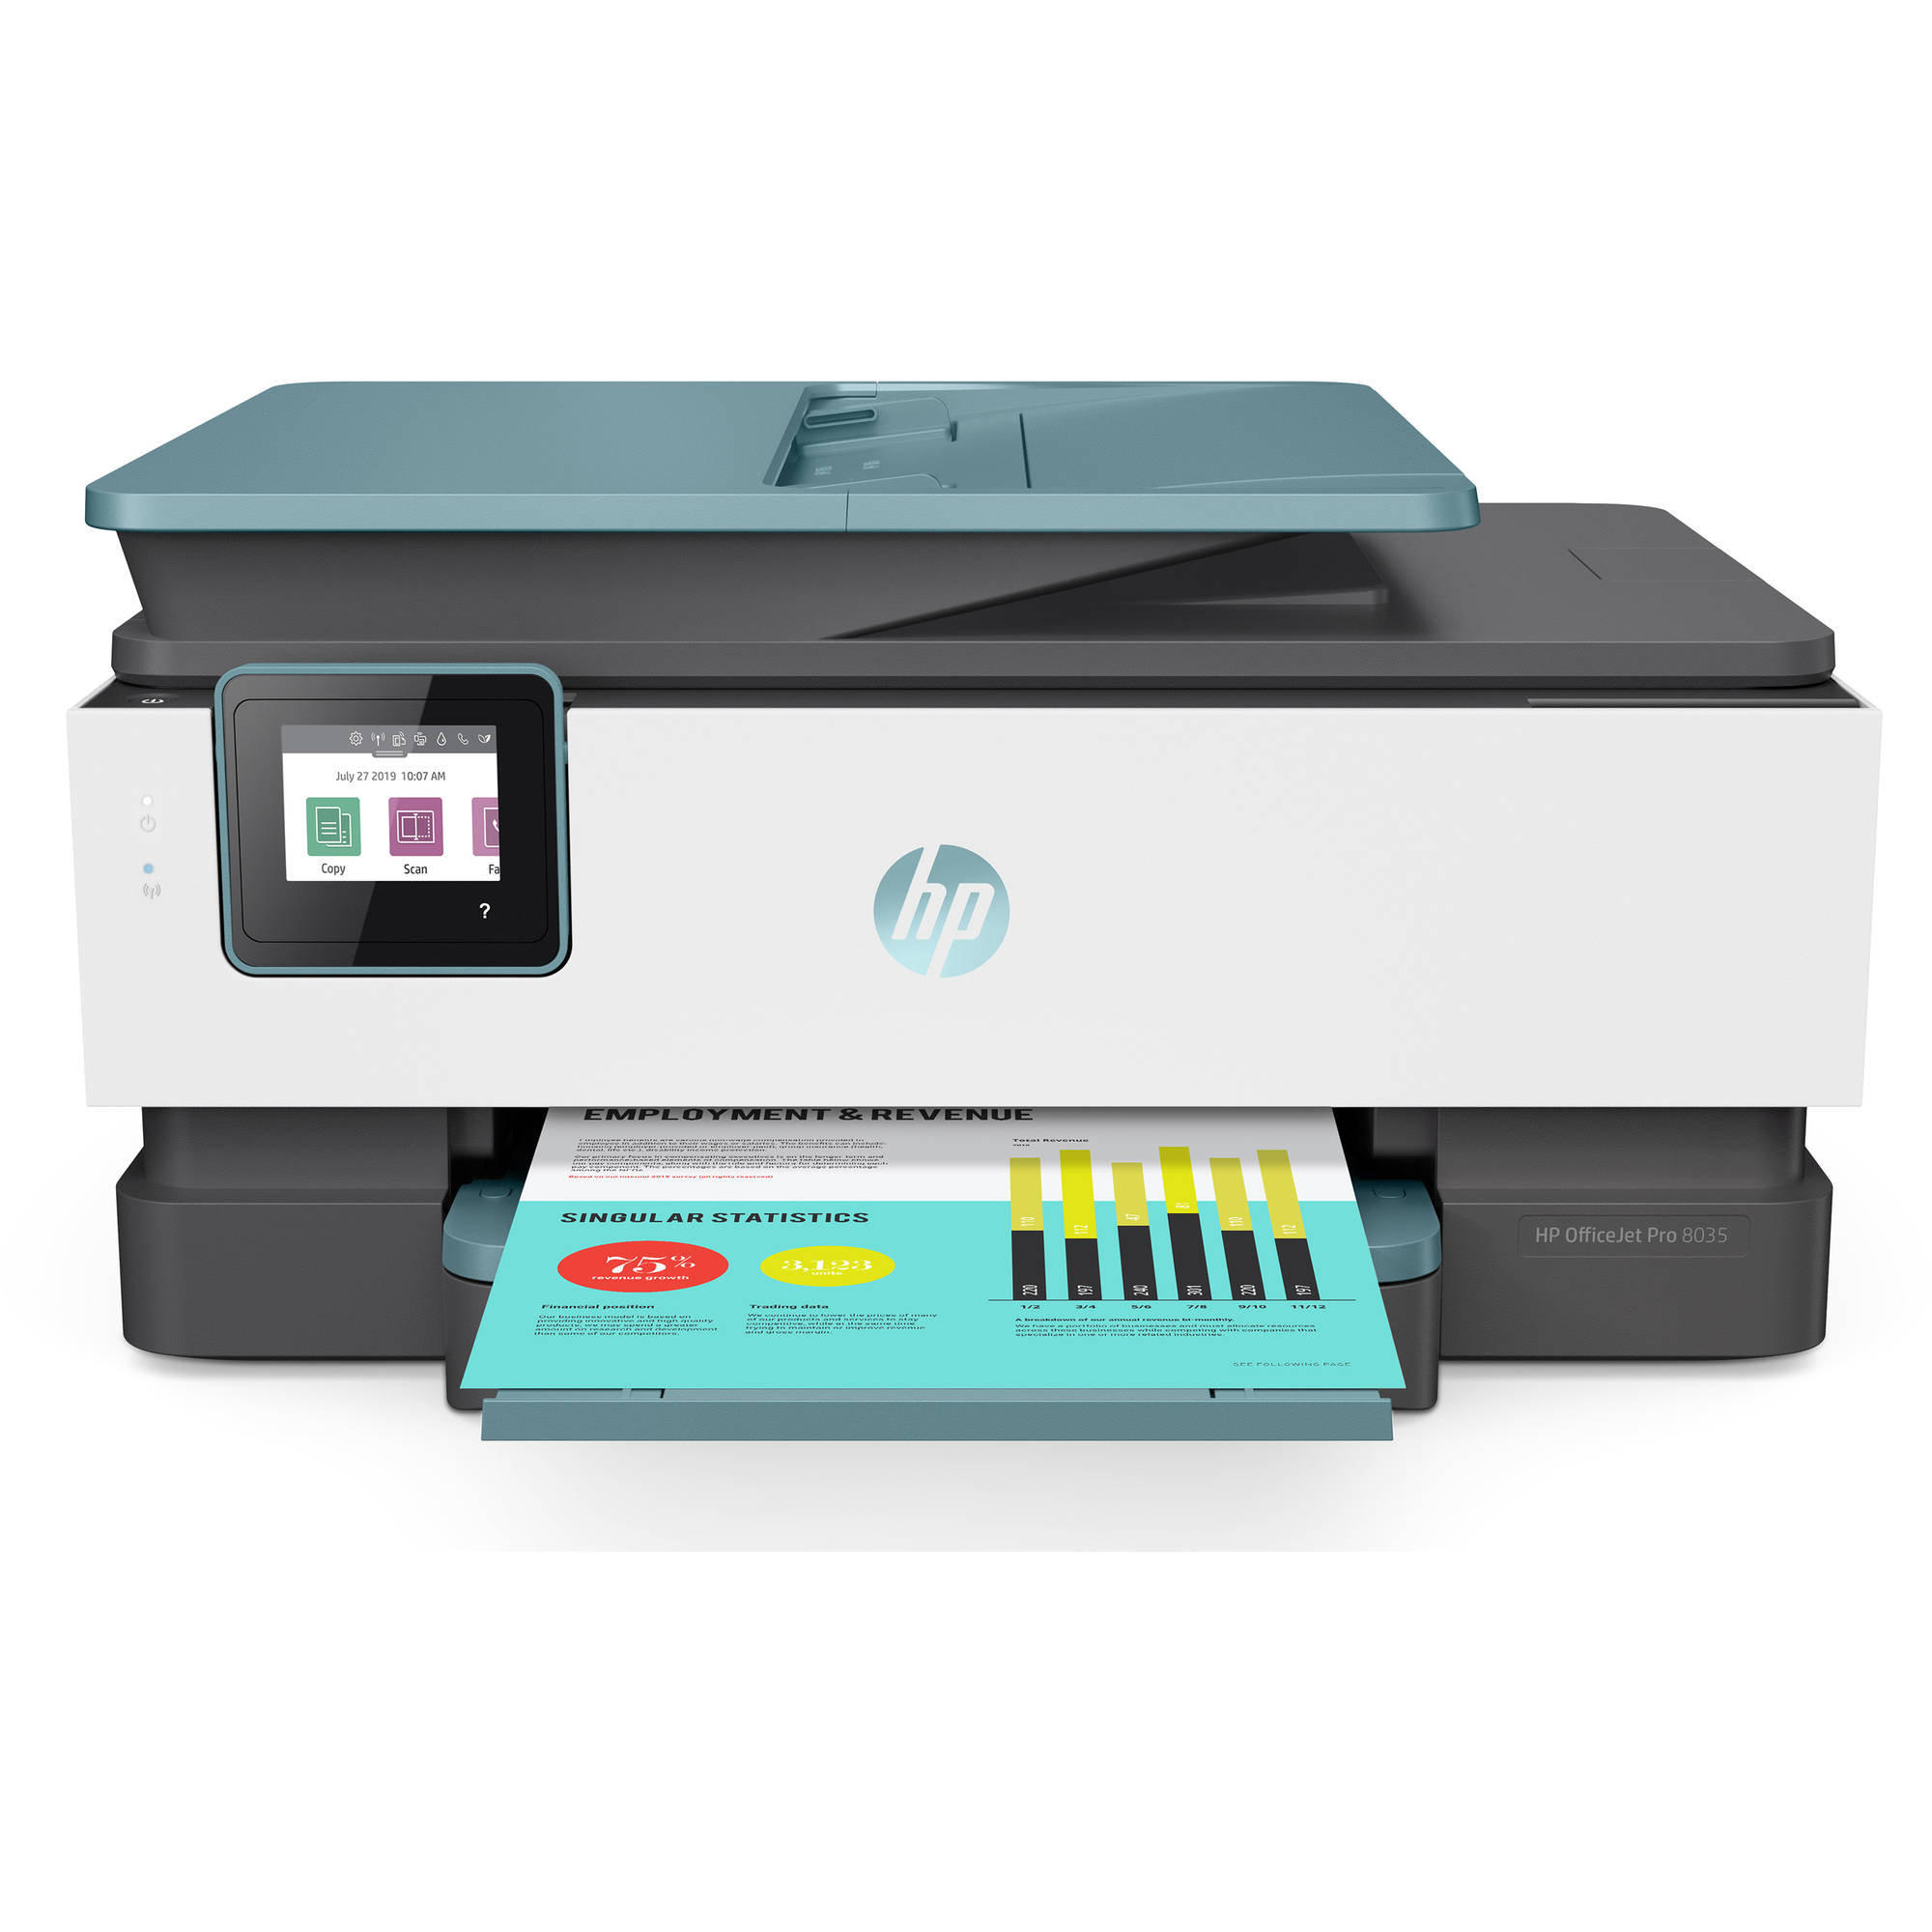 HP HP-OJPRO8035E-O-RB OfficeJet Pro 8035 All-in-One Printer, Oasis - Certified Refurbished